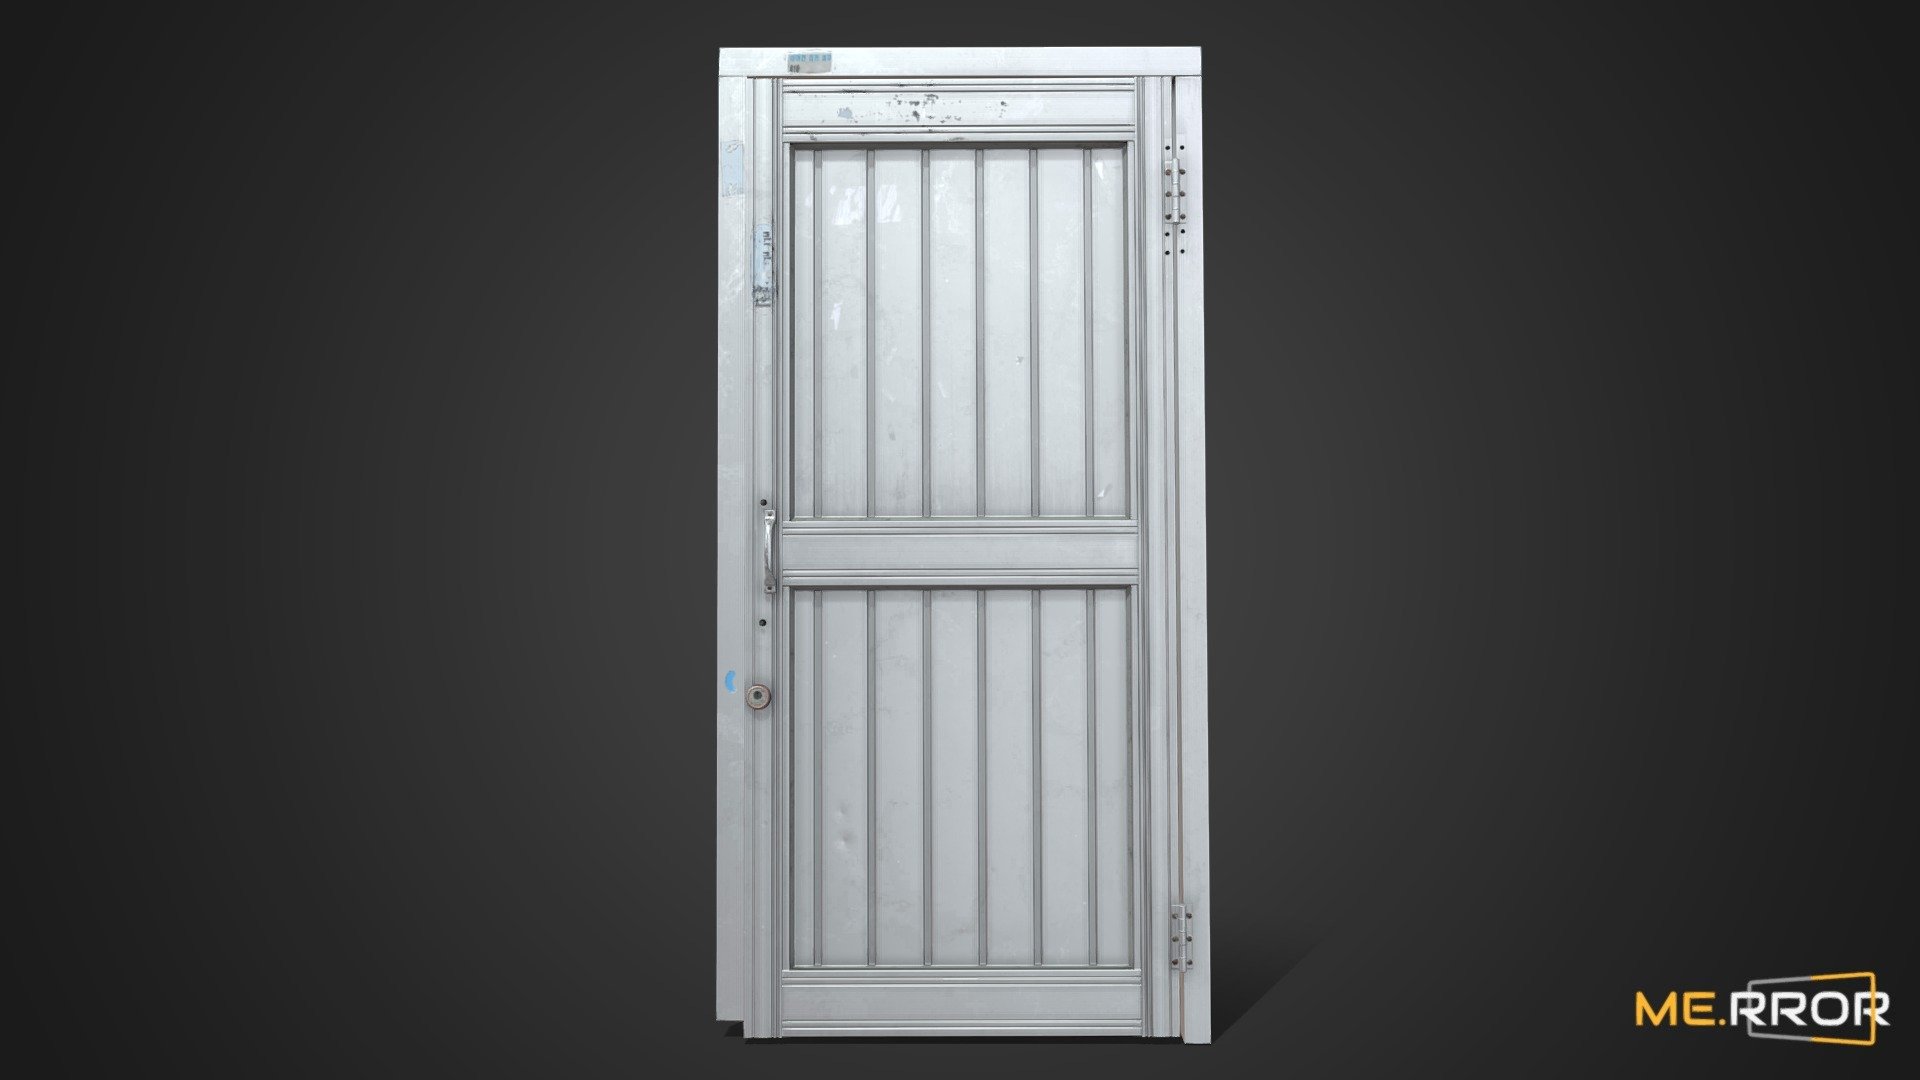 MERROR is a 3D Content PLATFORM which introduces various Asian assets to the 3D world


3DScanning #Photogrametry #ME.RROR - [Game-Ready] Old Metal Door 03 - Buy Royalty Free 3D model by ME.RROR (@merror) 3d model